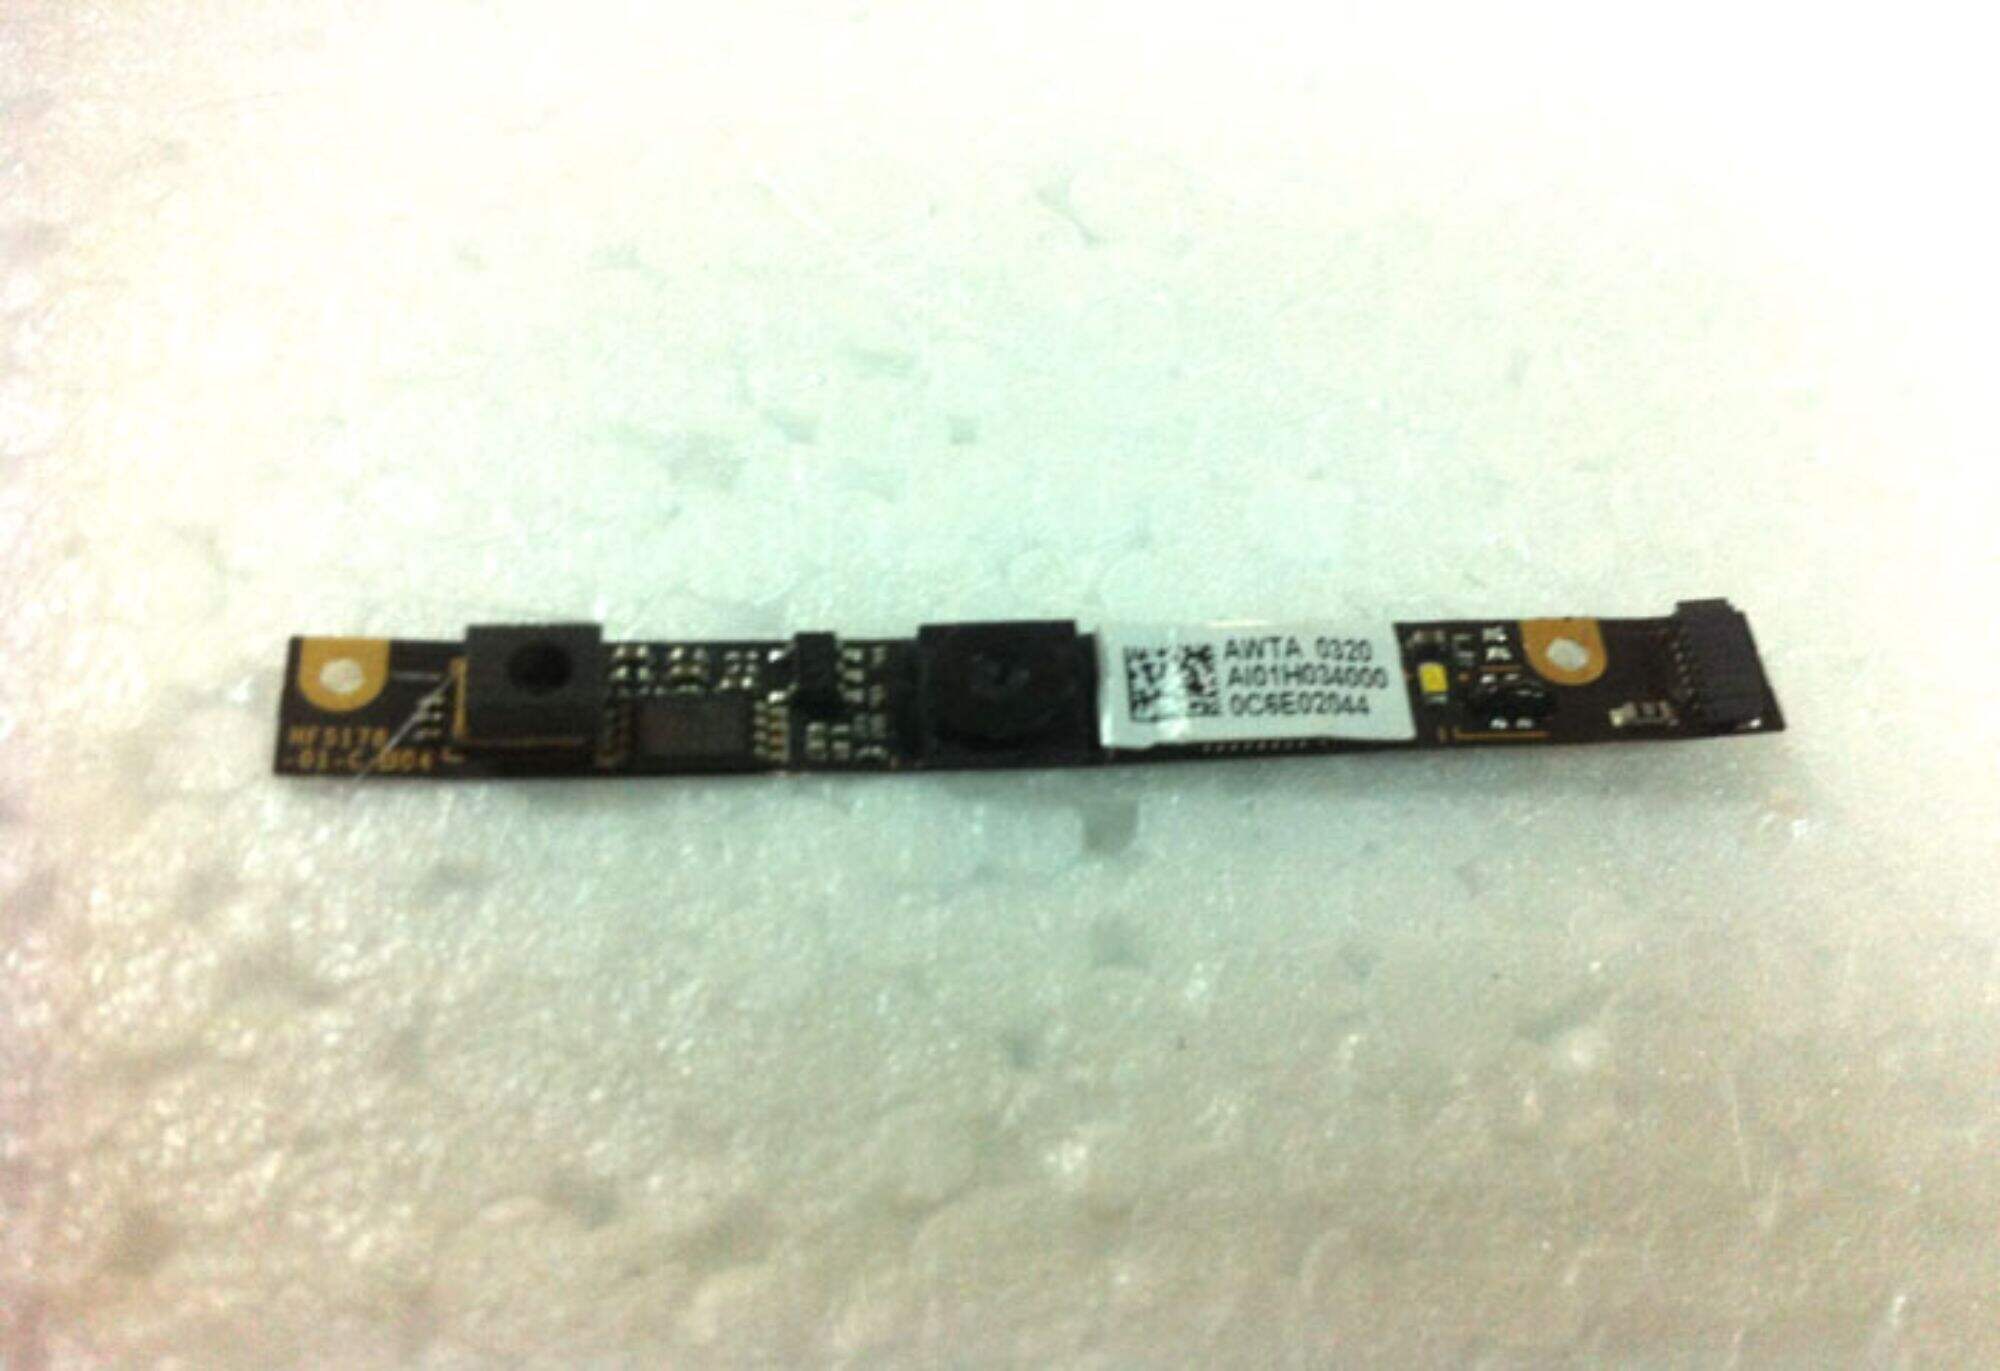 Wide Angle Laptop Webcam Camera Module Repair For VIZIO CT15-A1 Replacements